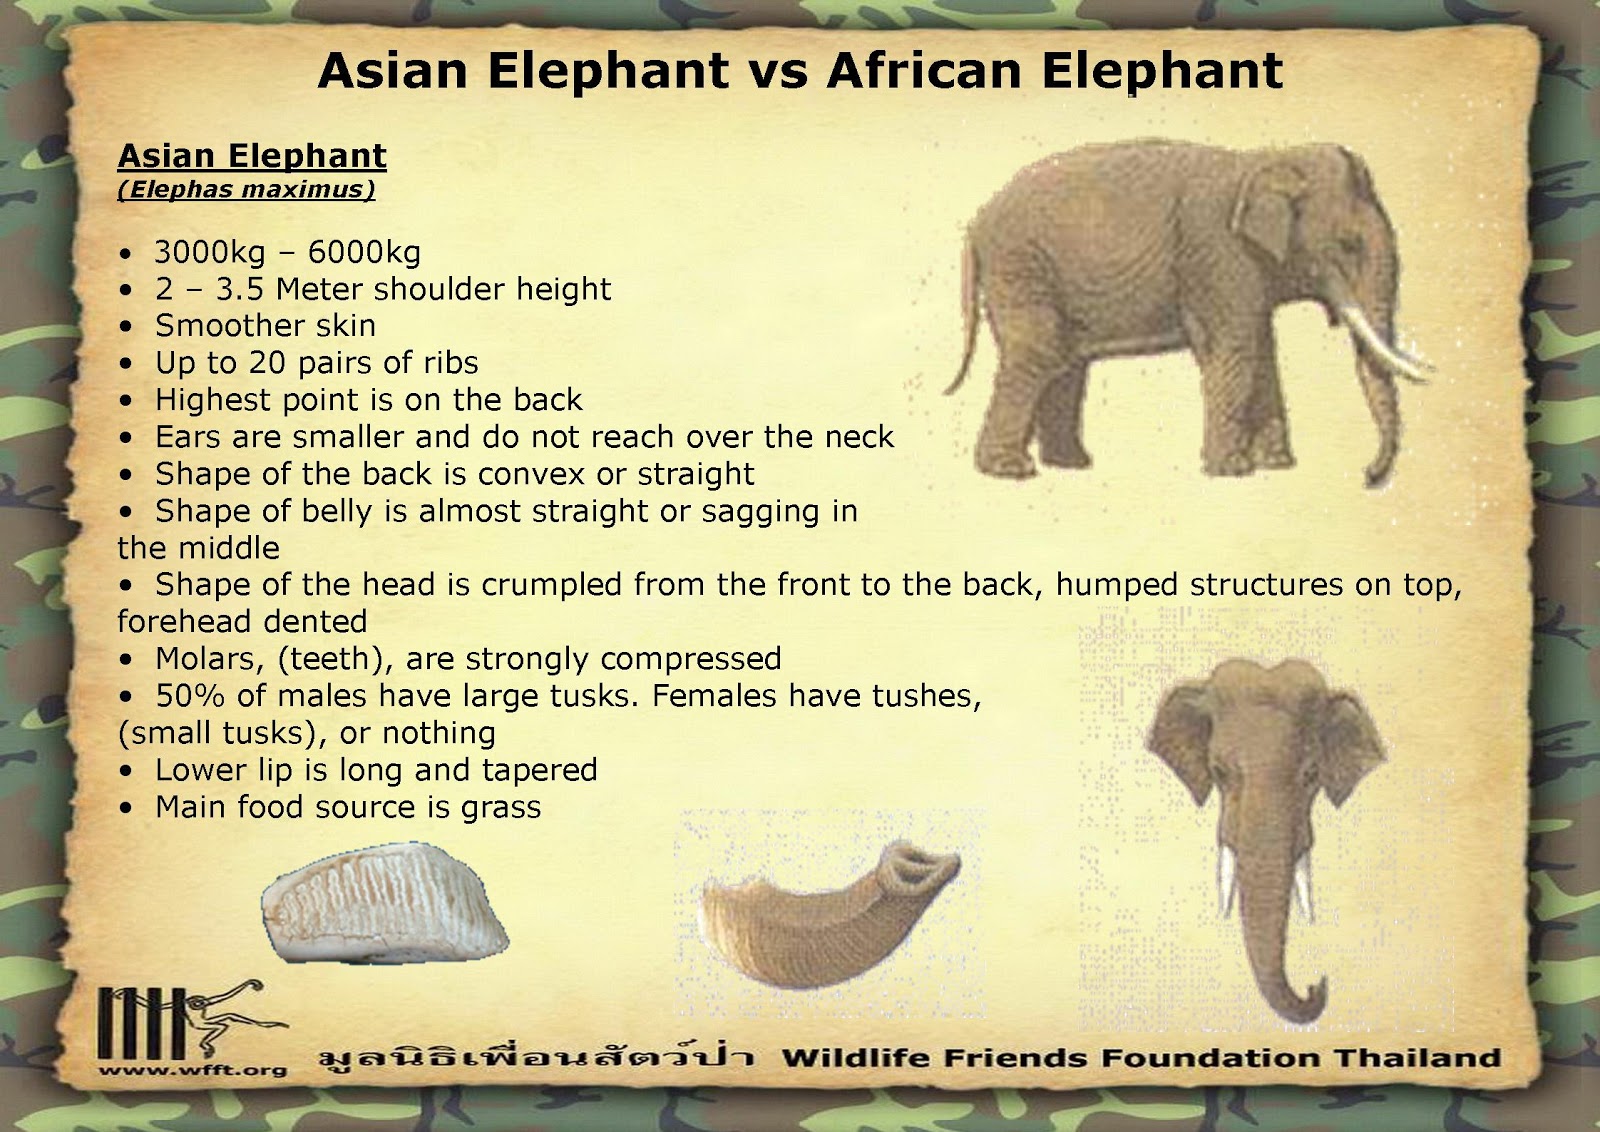 Facts about wild animals